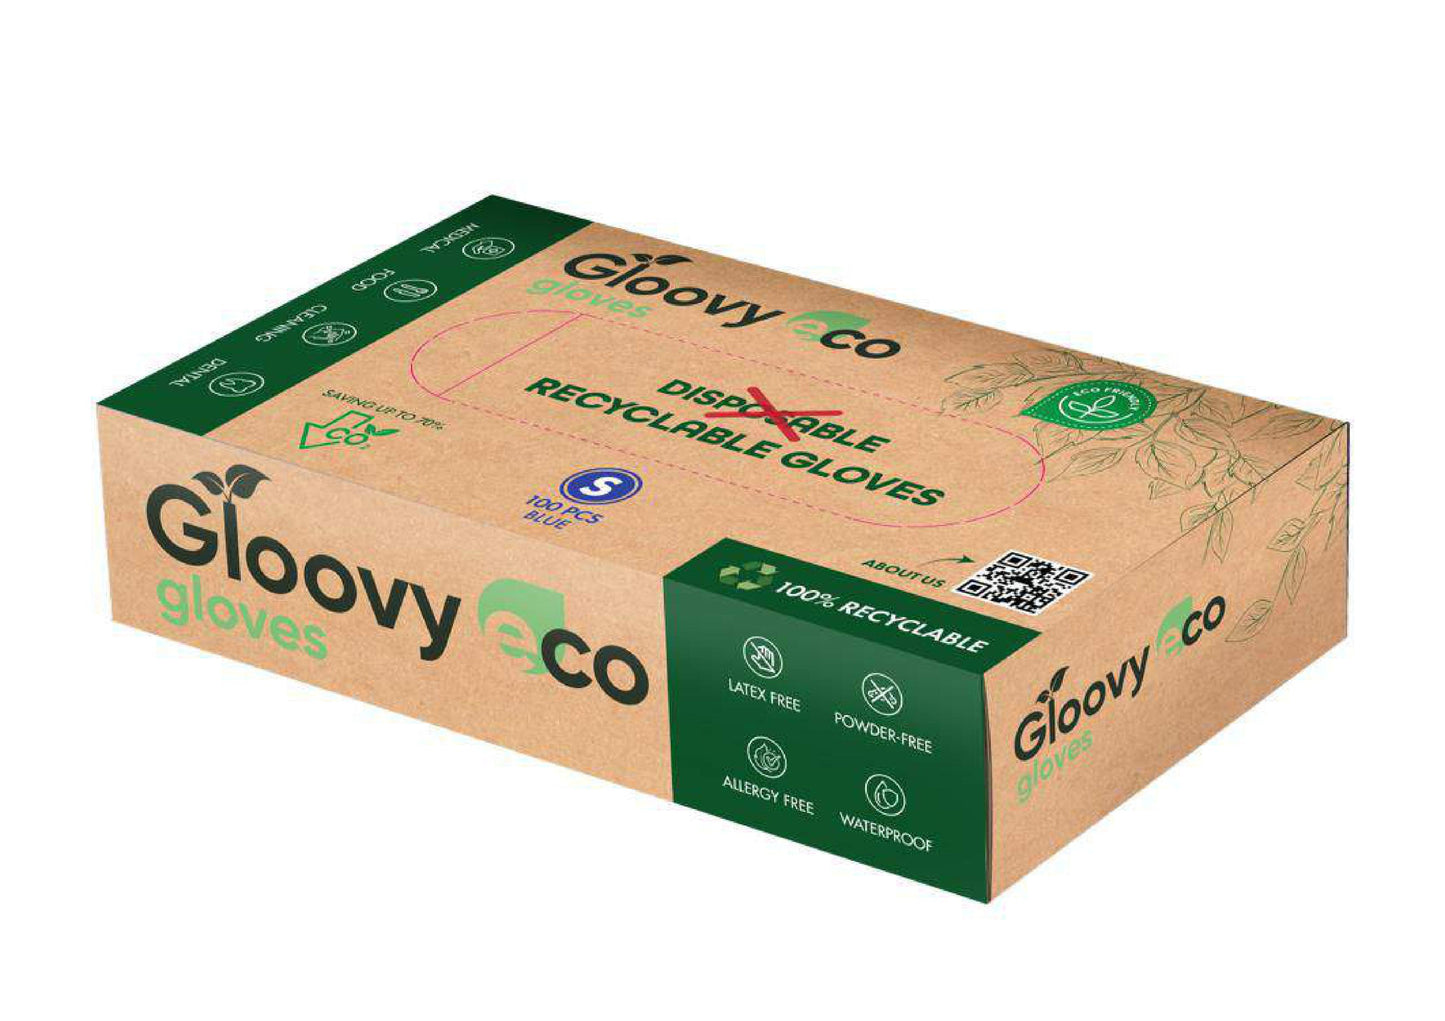 Gloovy - Eco Gloves - blue gloves - discount package 20/outer box